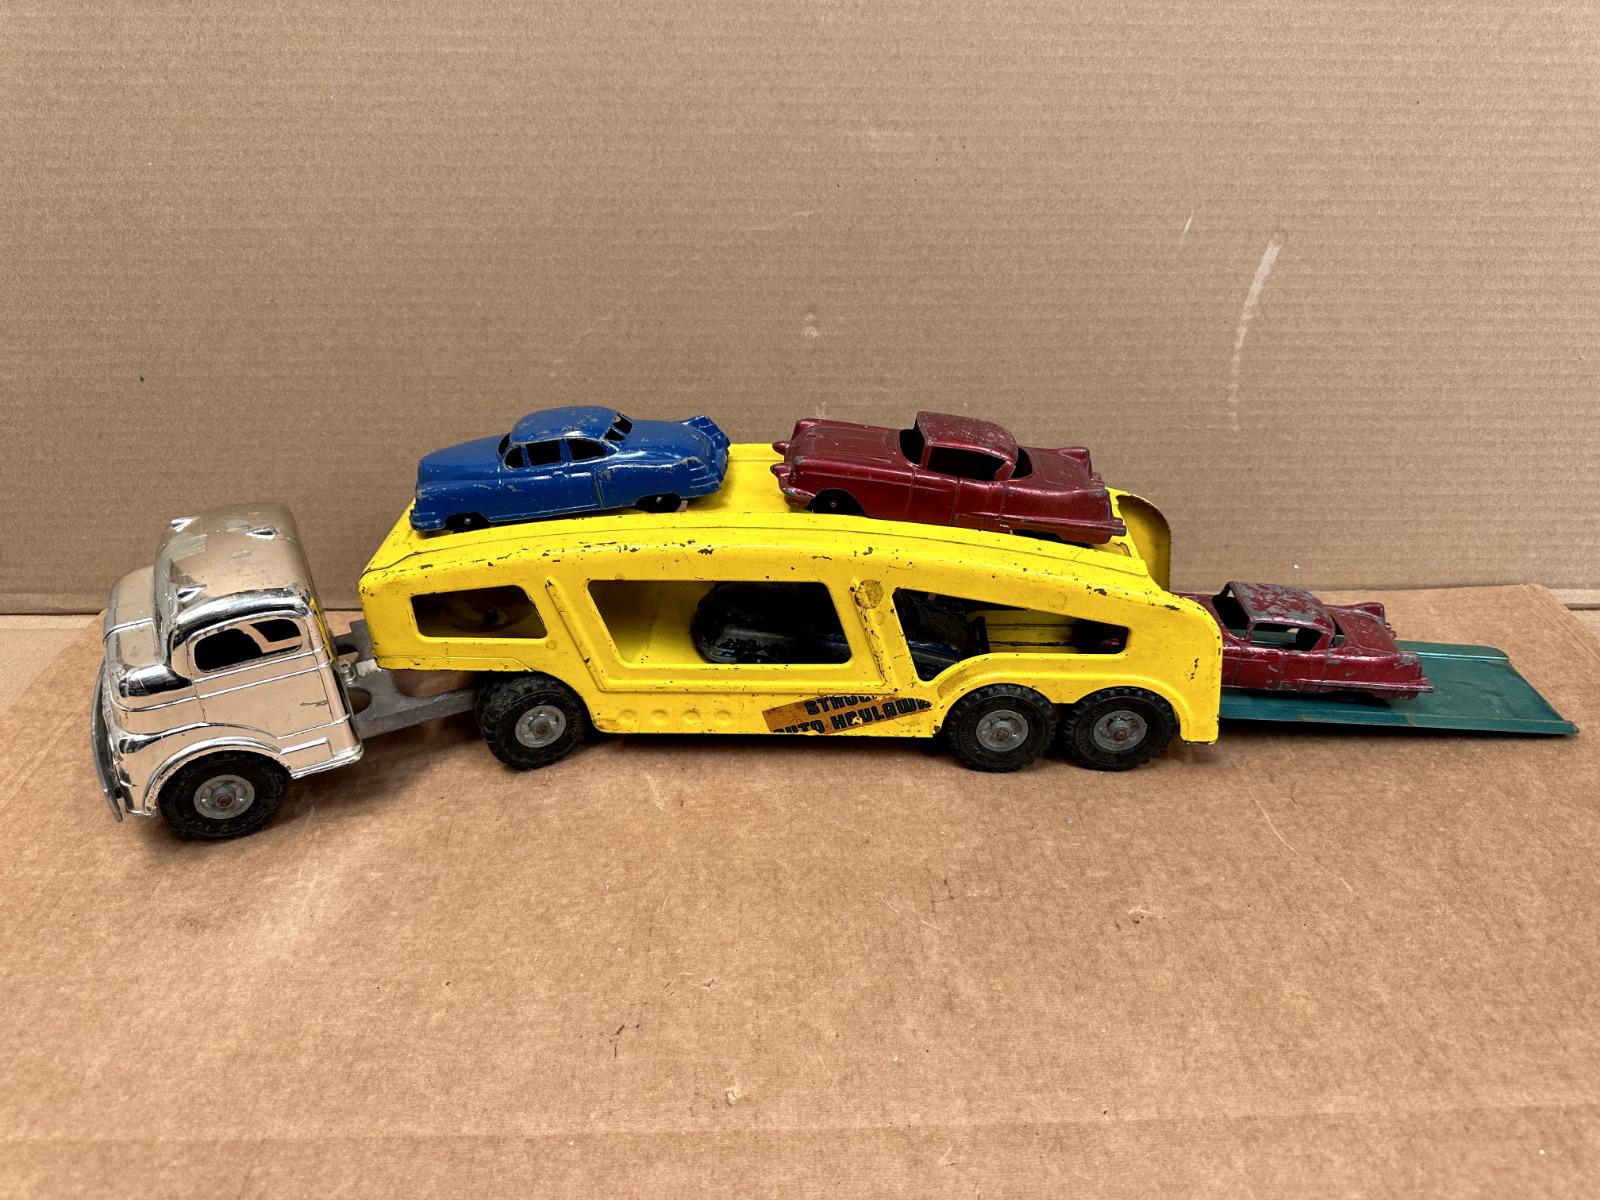 1957 Structo Auto Transport Car Hauler Truck Pressed Steel Toy & Cars Nice